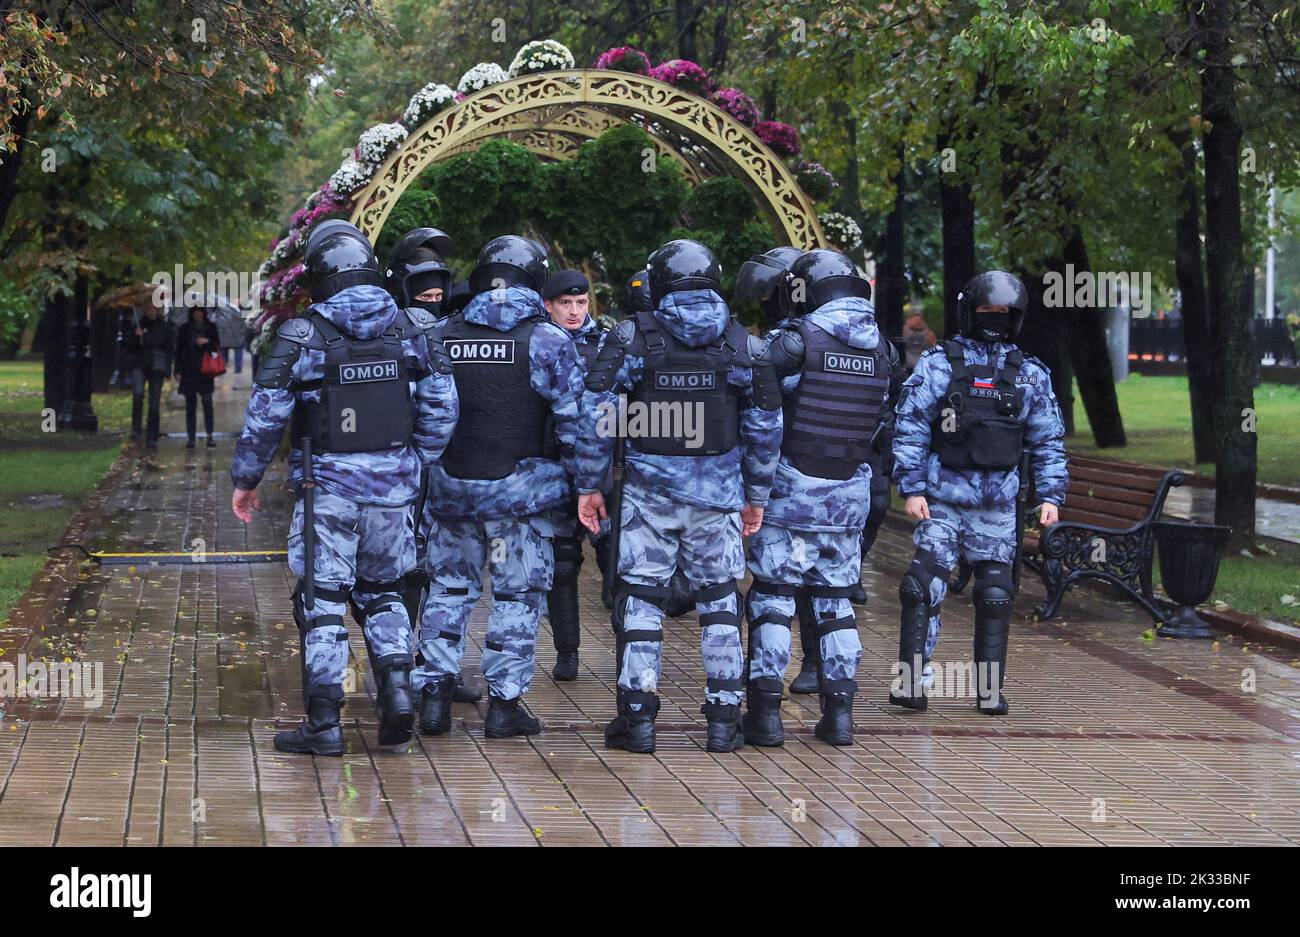 Russian law enforcement officers stand guard during a rally, after opposition activists called for street protests against the mobilisation of reservists ordered by President Vladimir Putin, in Moscow, Russia September 24, 2022. REUTERS/REUTERS PHOTOGRAPHER Stock Photo